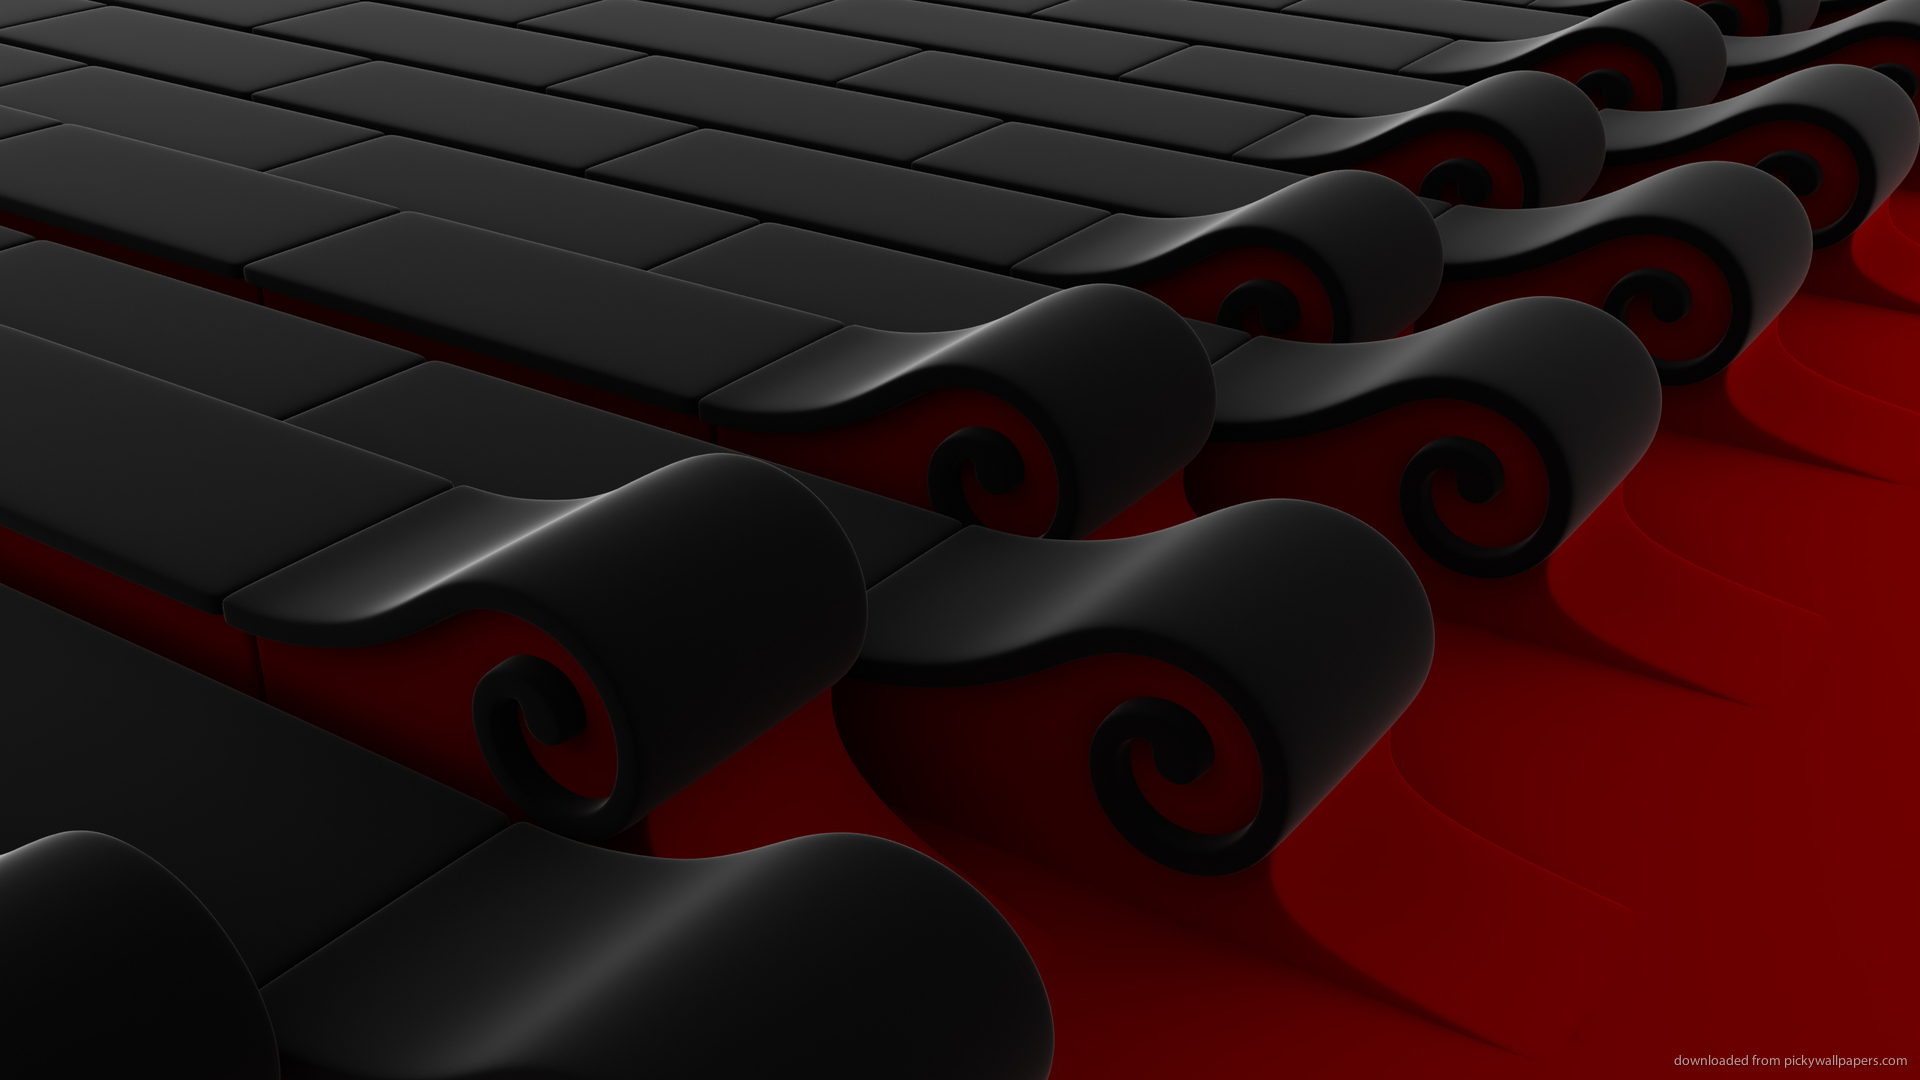 Download 1920x1080 Black And Red Waves Render Wallpaper 1920x1080